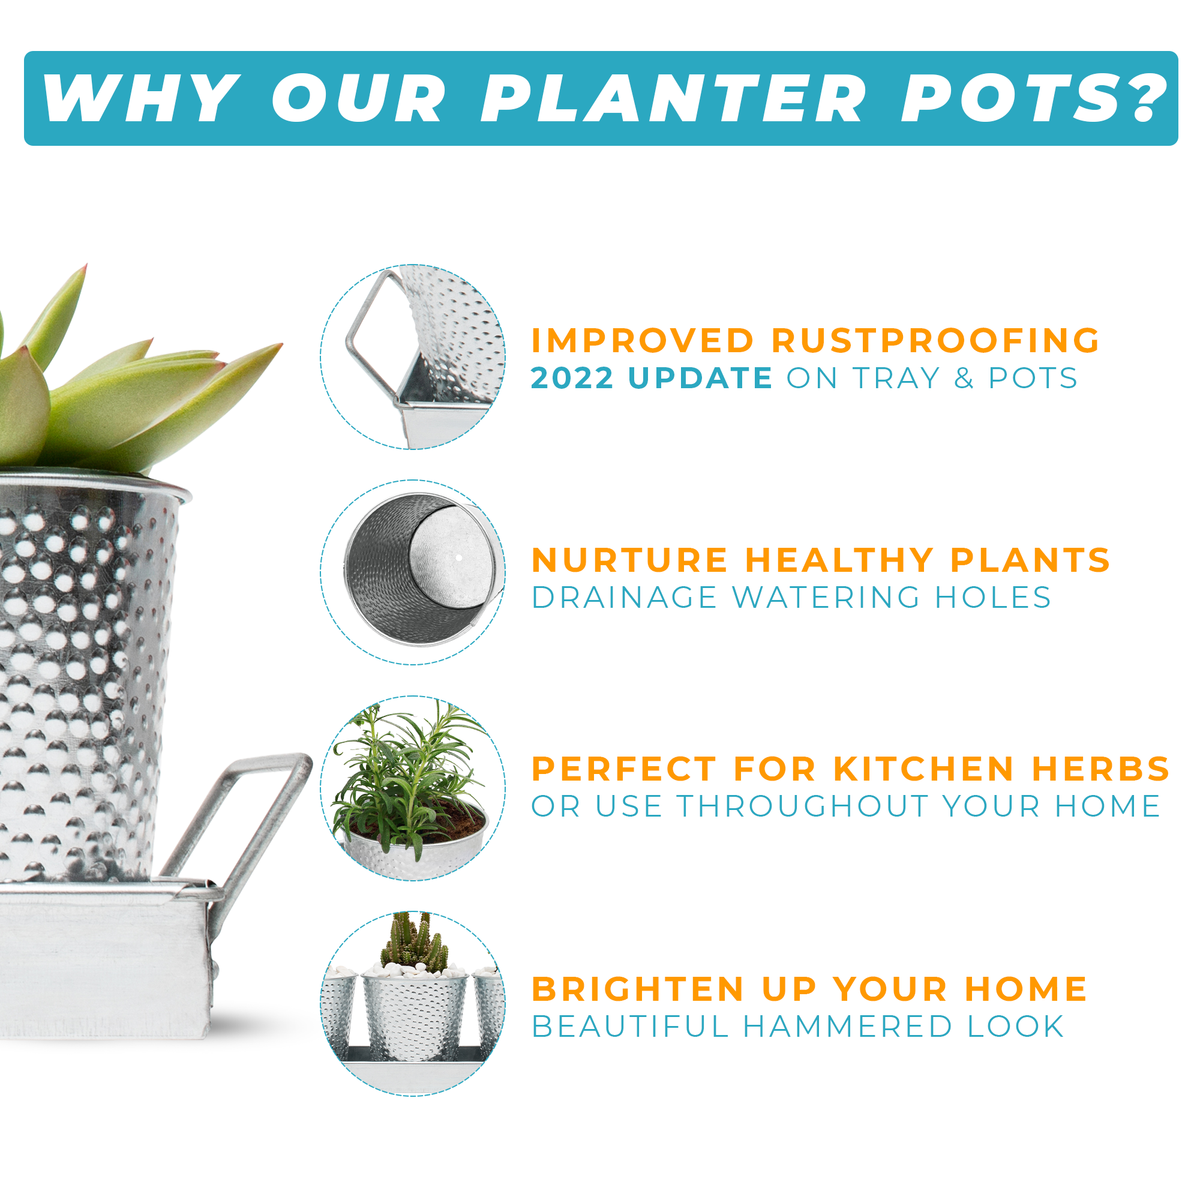 Why our planter pots? Product features that separate Saratoga Home&#39;s herb pots from competition